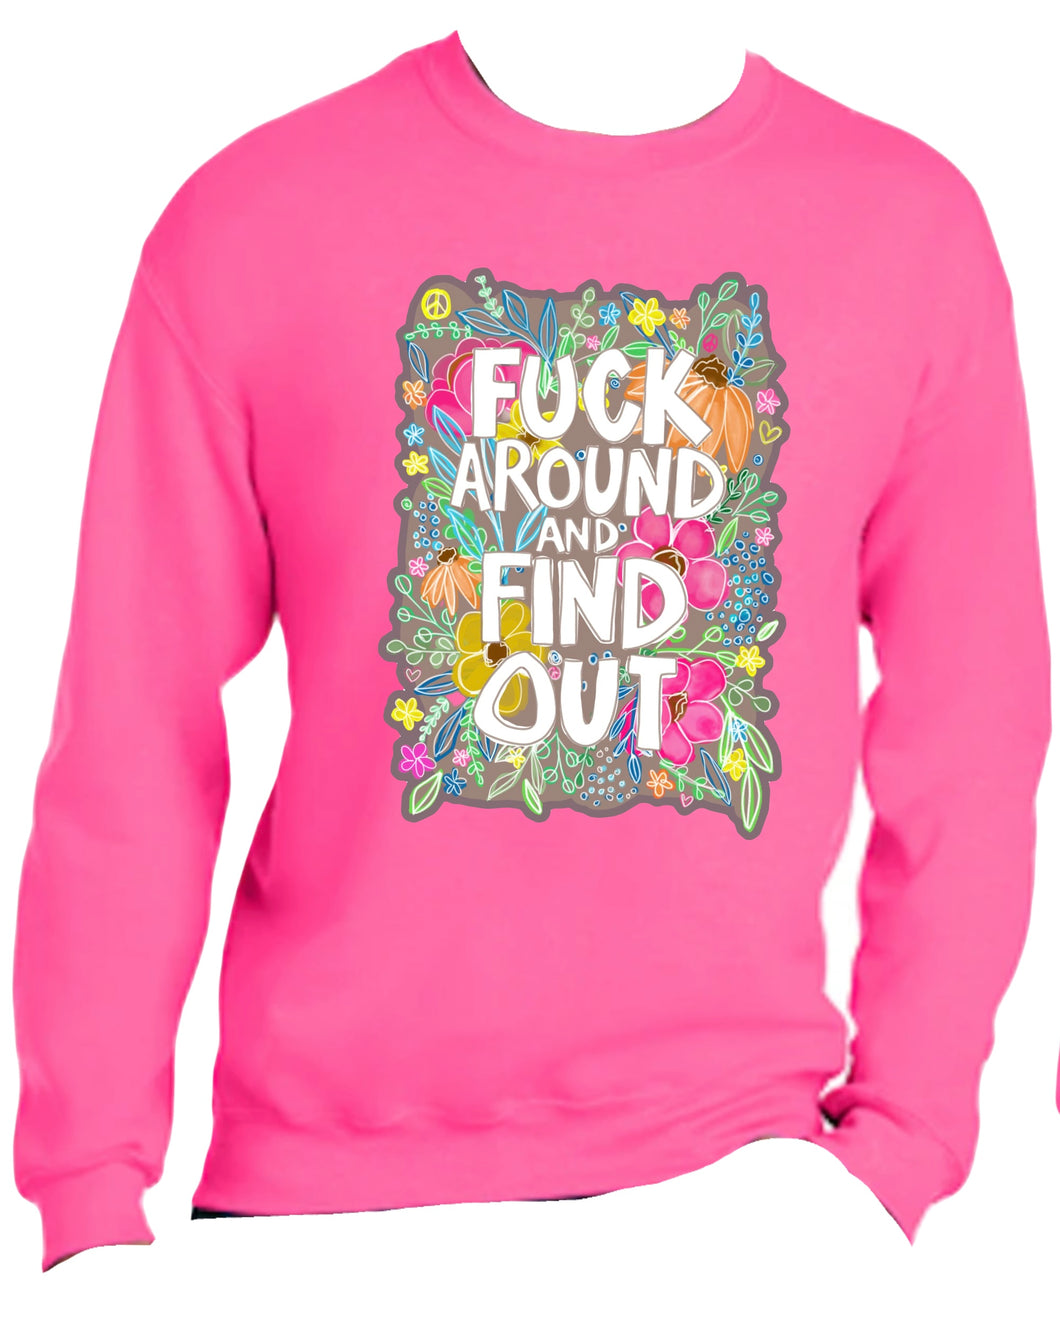 FUCK AROUND AND OUT Shirts, Hoodies and more Amber Mclean-Coyne